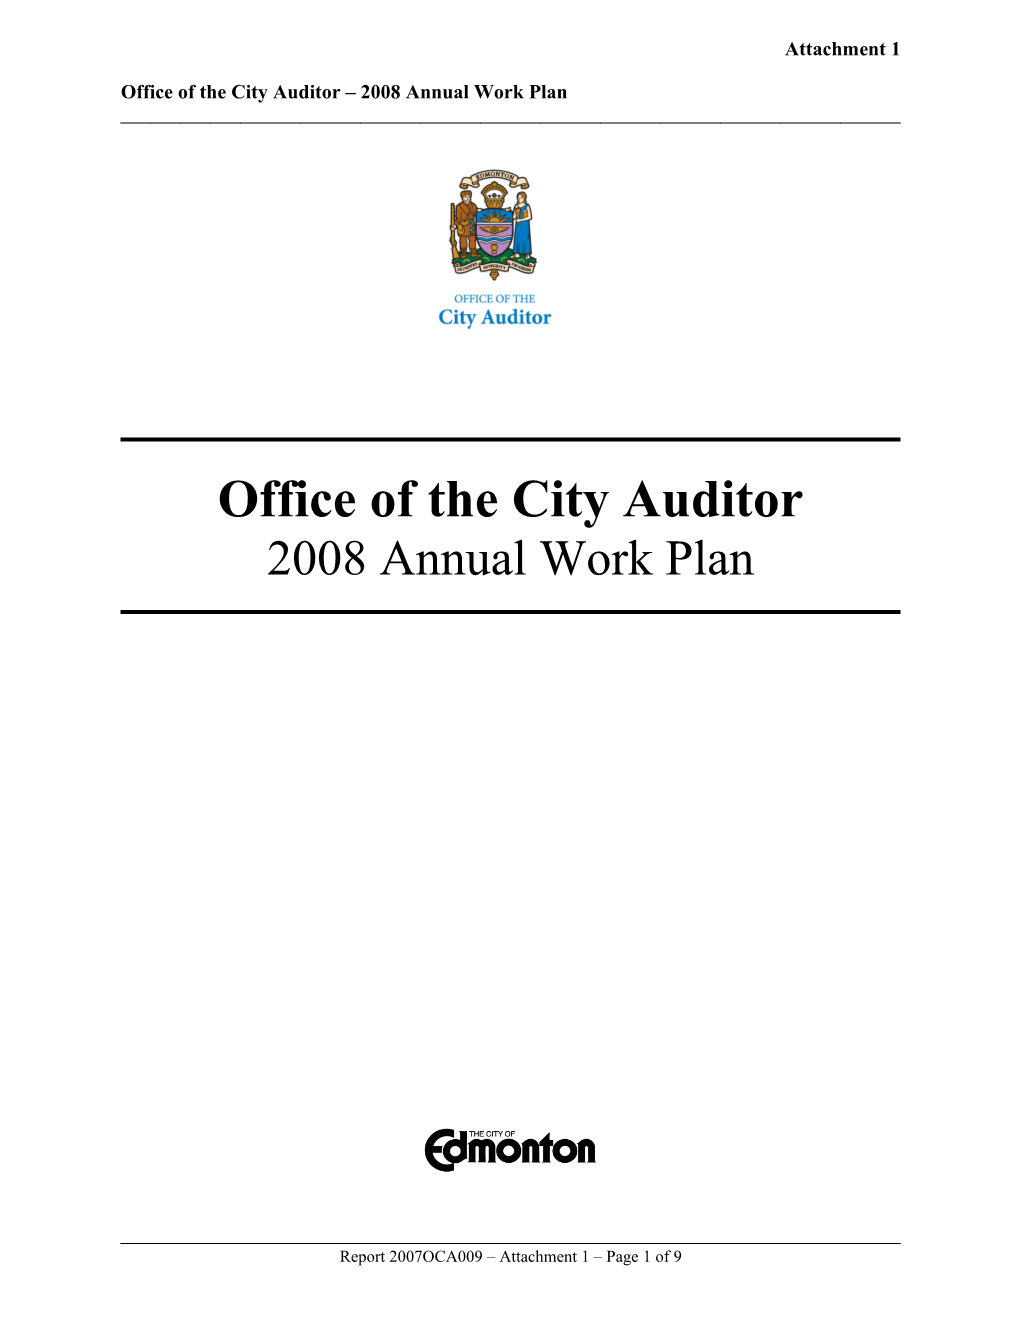 Report for Audit Committee November 20, 2007 Meeting